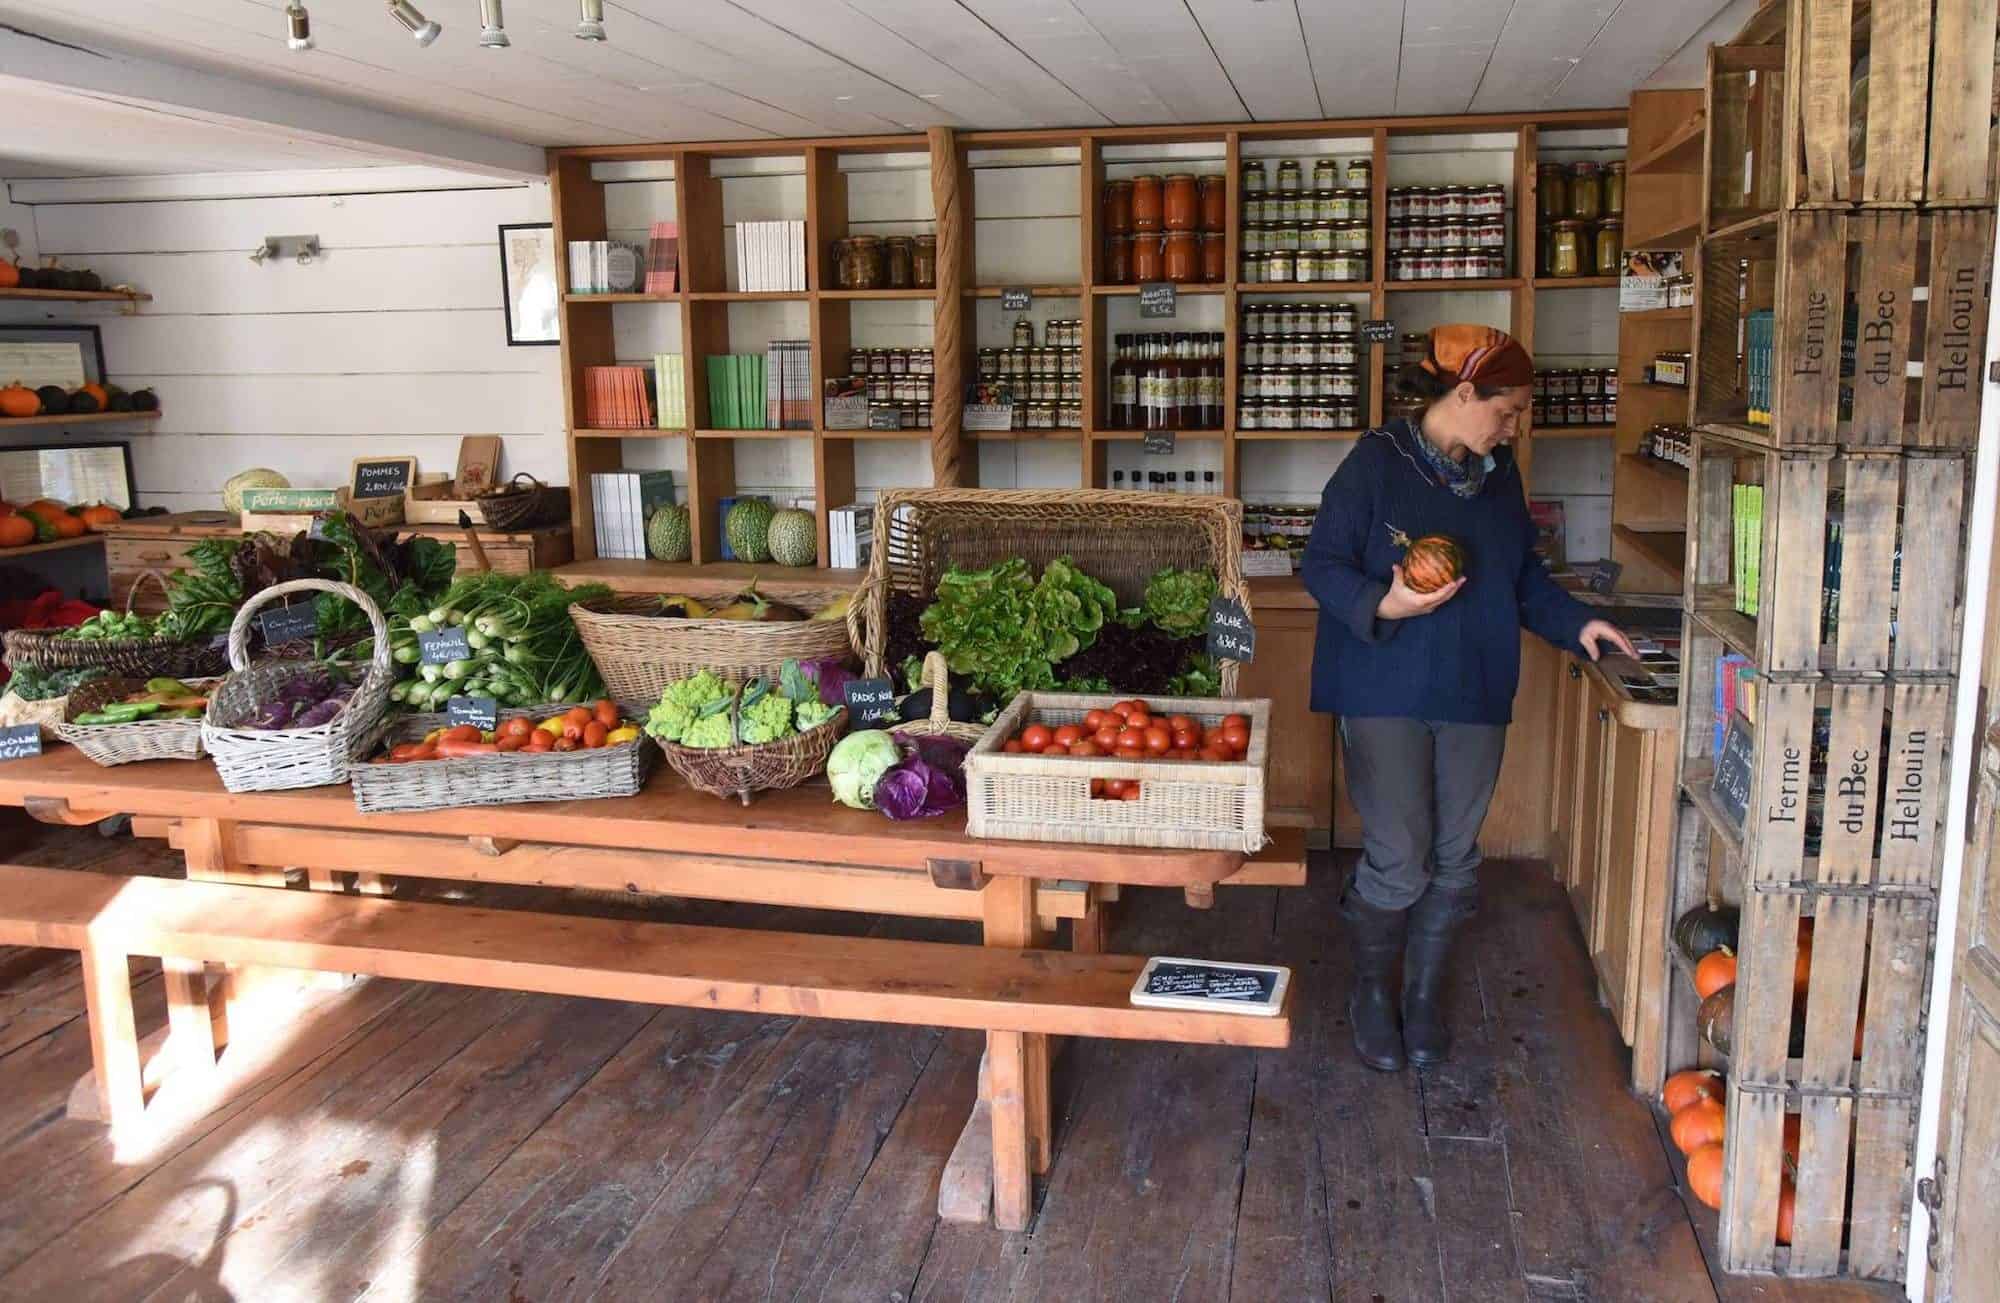 The Bec Hellouin farm shop, which grows the vegetables it grows according to the principles of permaculture.